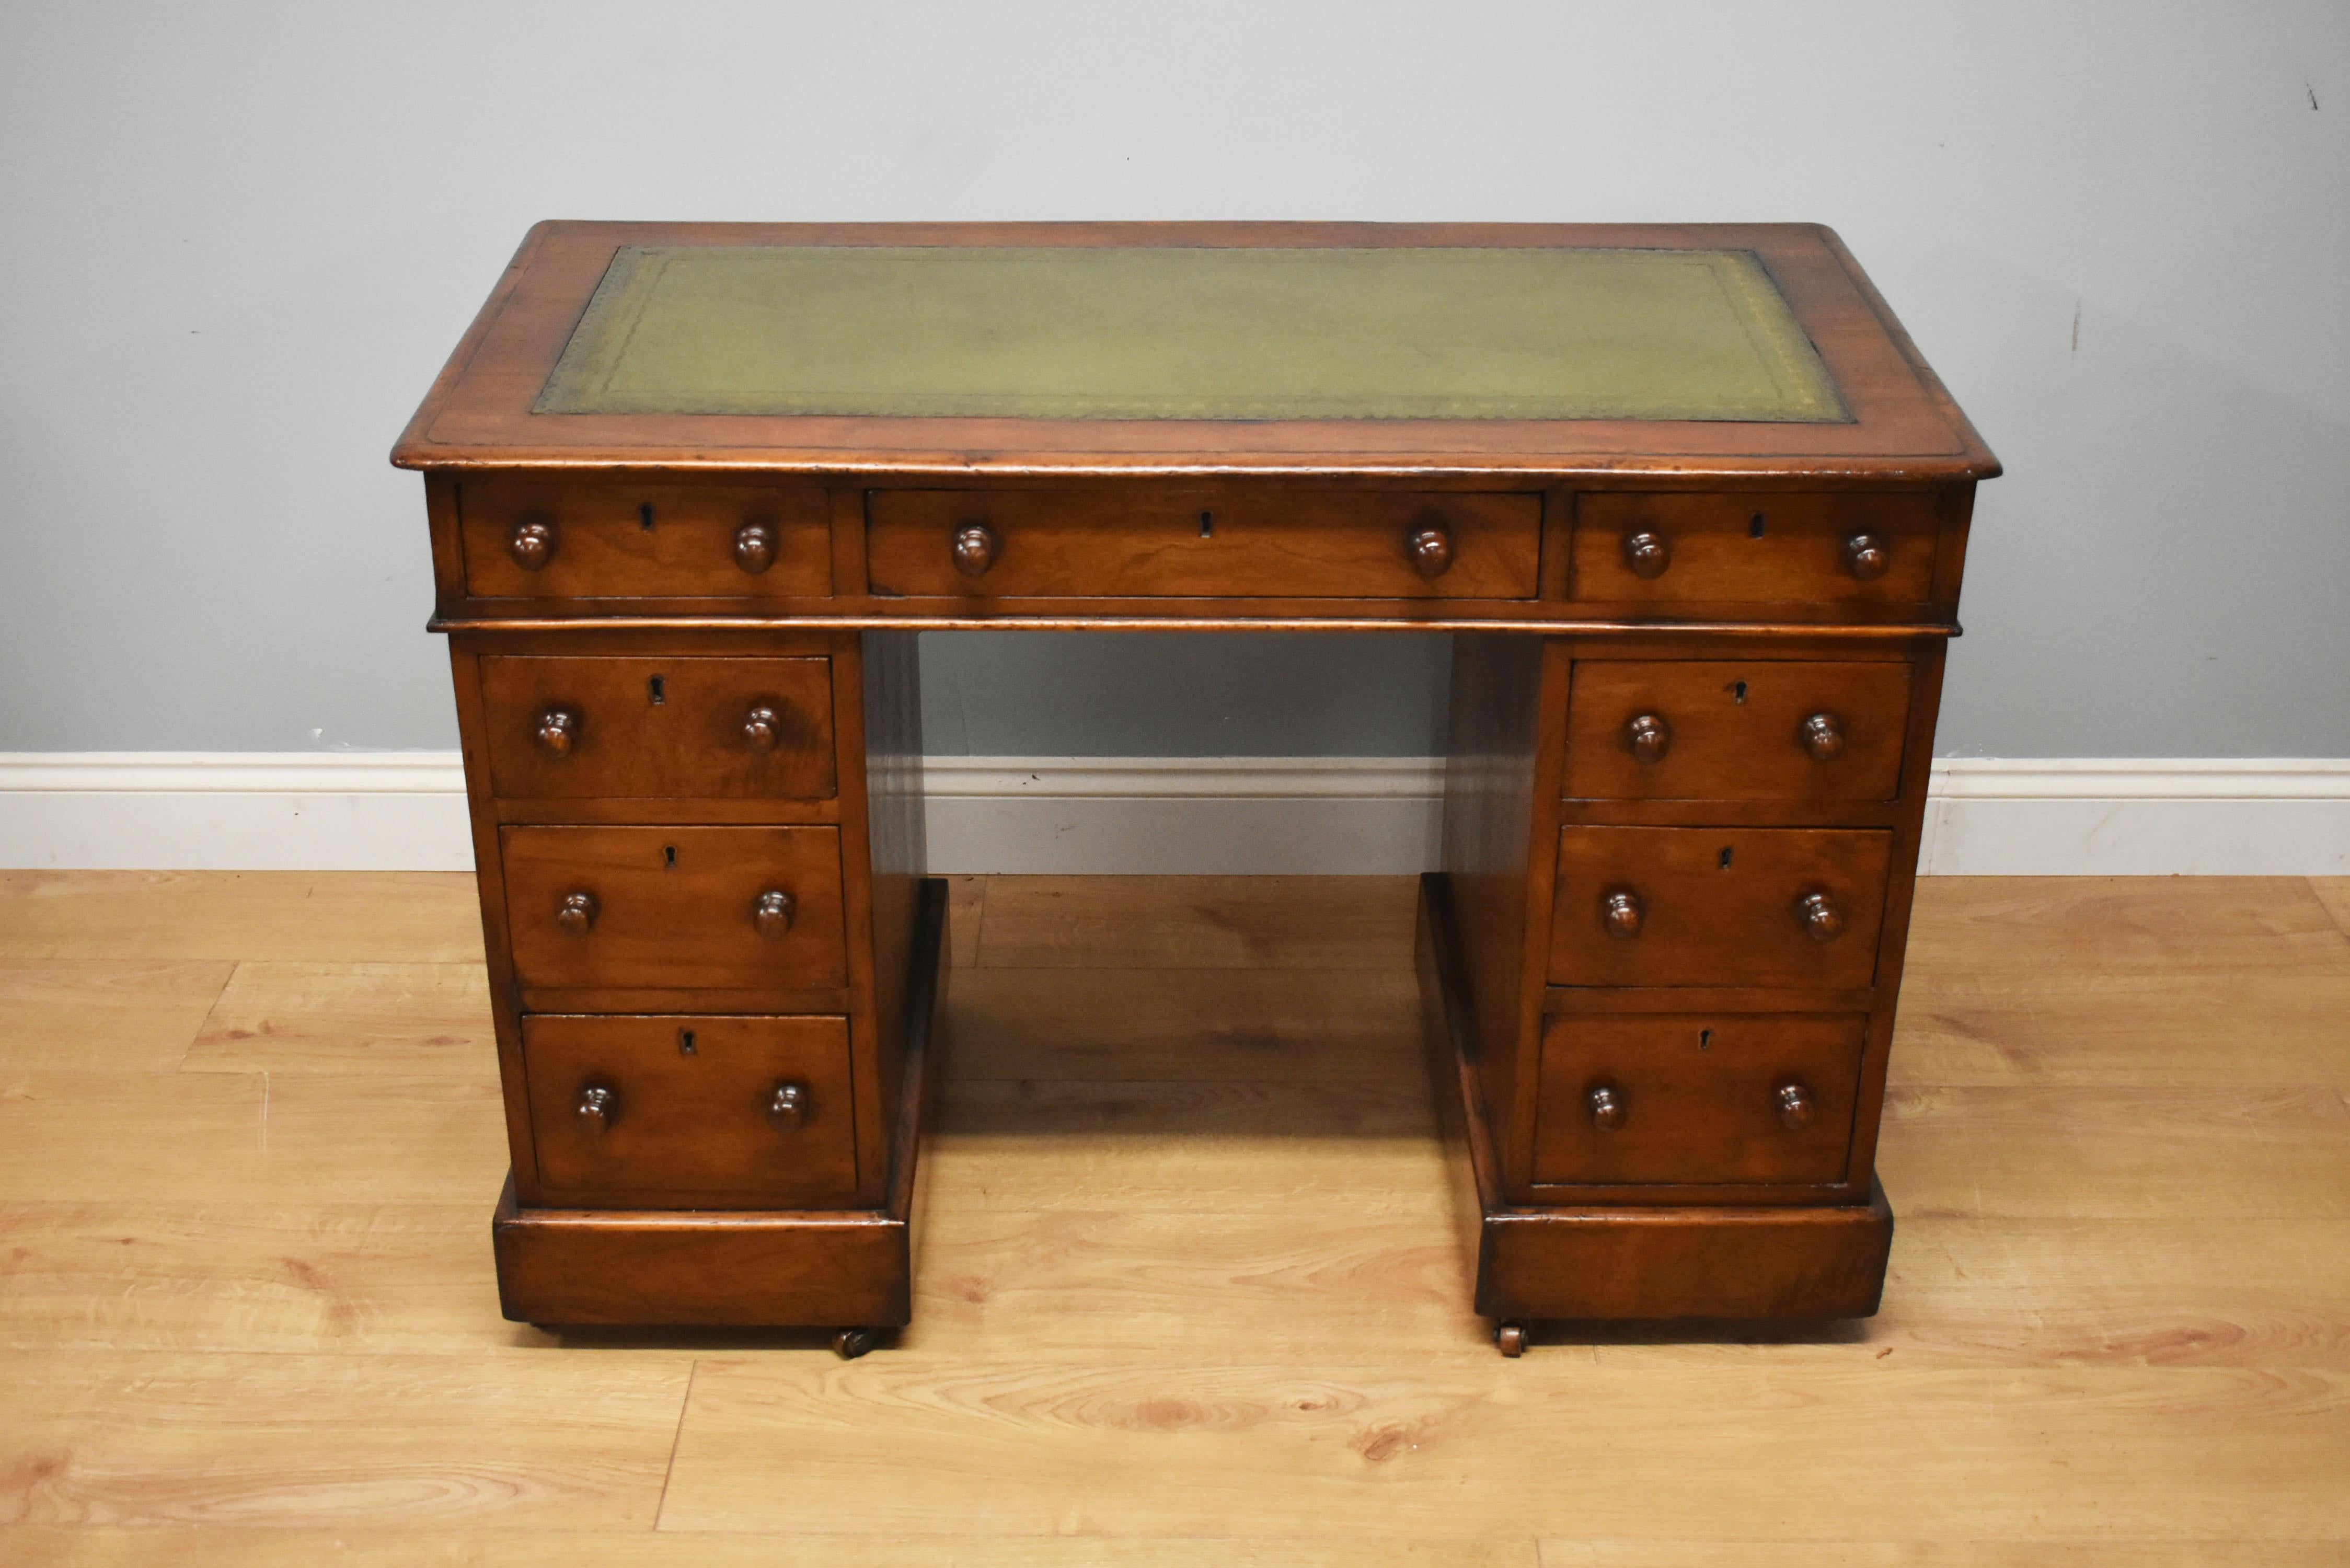 For sale is a 19th century Victorian pedestal desk. The top of the desk having a green leather insert with decorative gold tooling, above three drawers, each with turned handles. The top fits onto two pedestals, each having a further three drawers